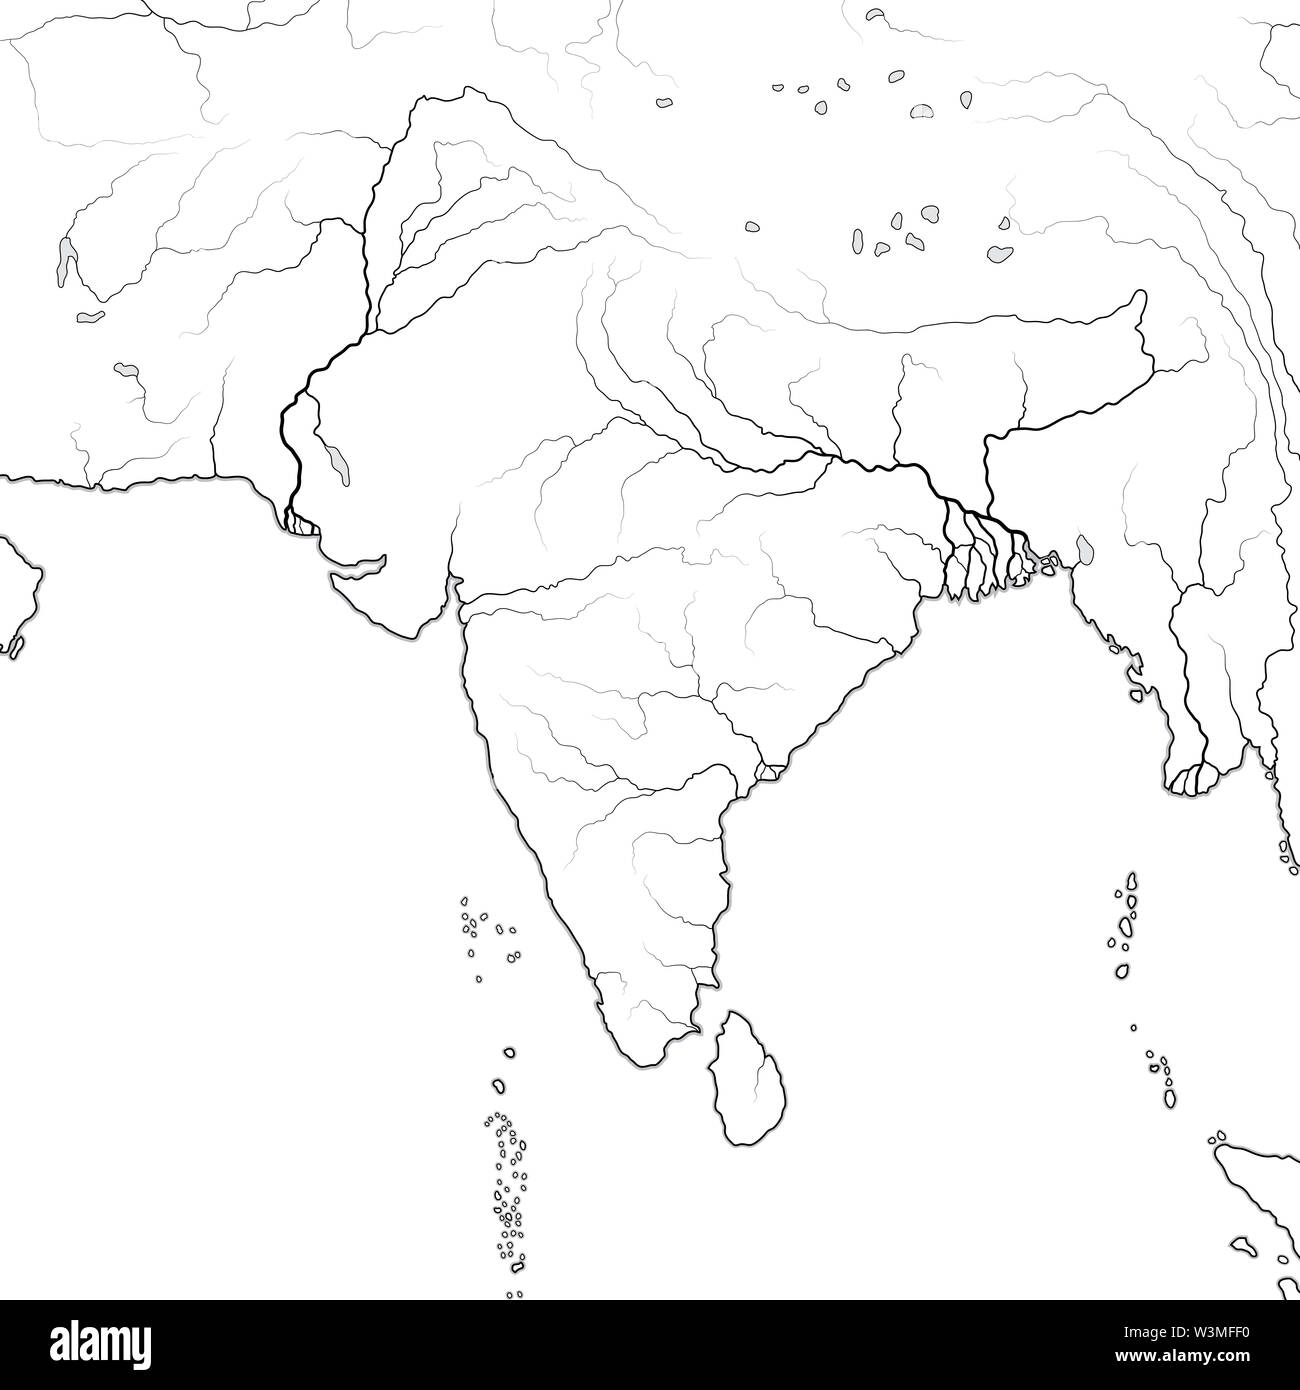 blank map of indian subcontinent World Map Of Indian Subcontinent India Pakistan Nepal blank map of indian subcontinent